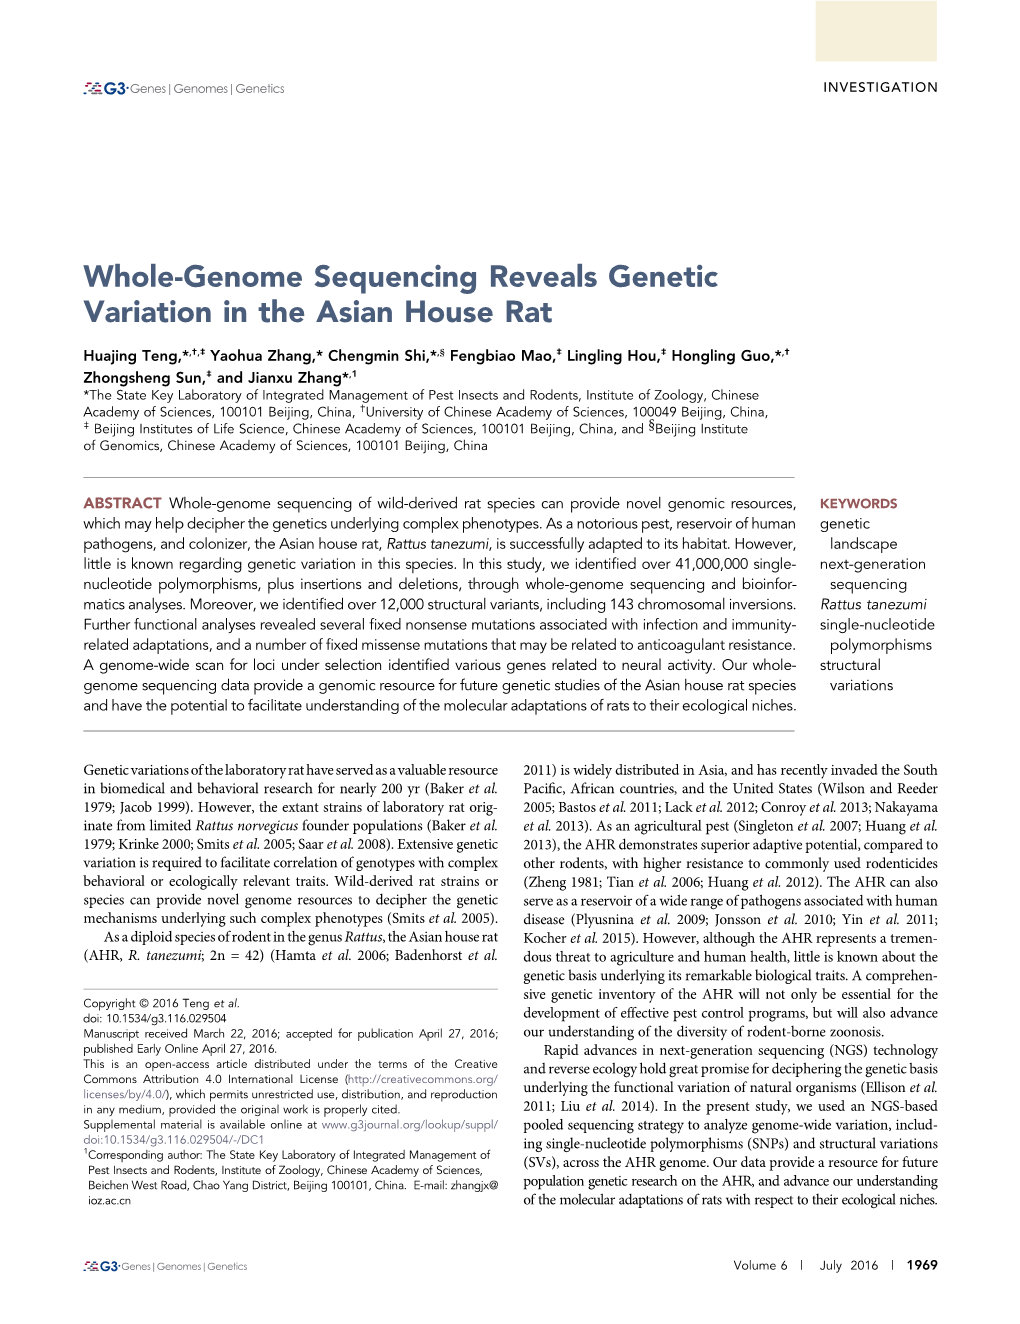 Whole-Genome Sequencing Reveals Genetic Variation in the Asian House Rat